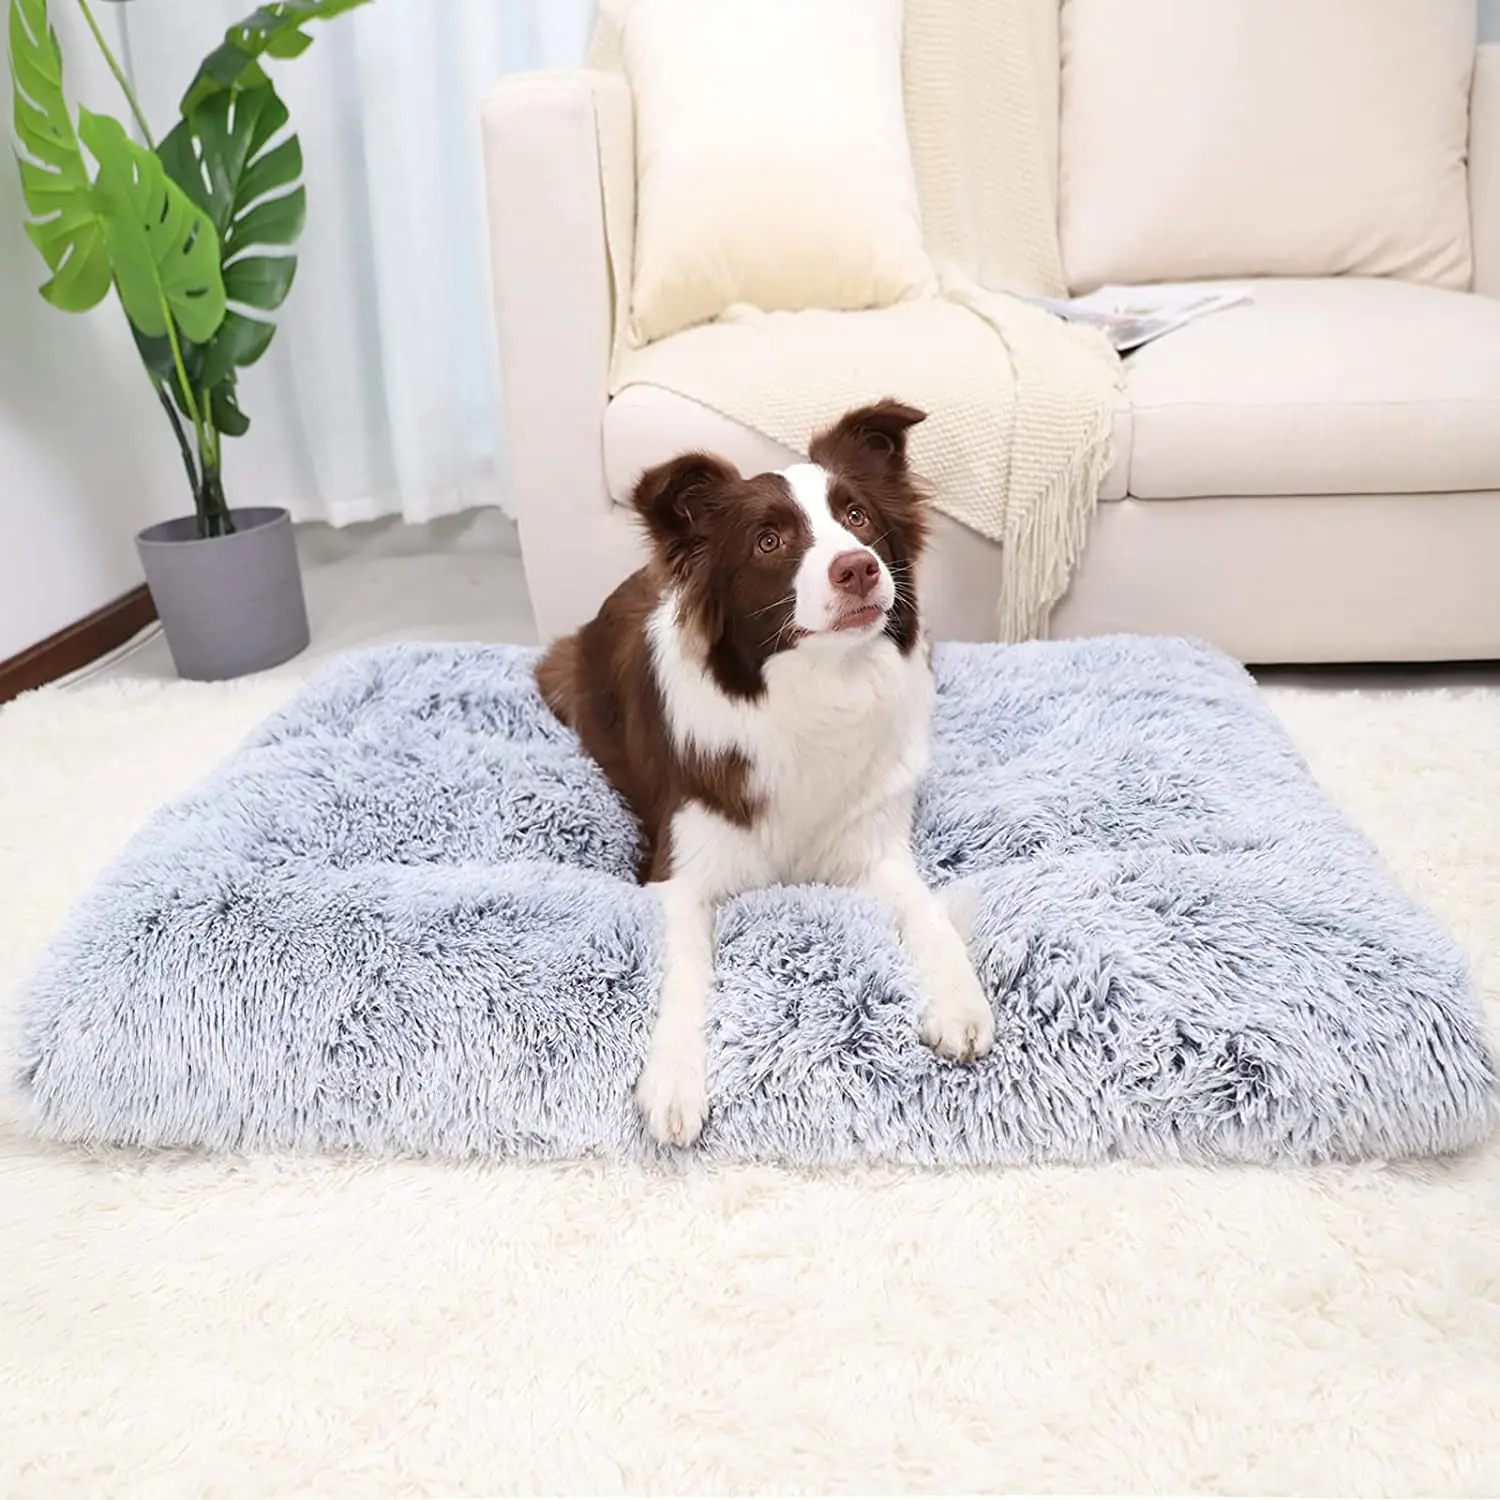 https://ae01.alicdn.com/kf/Sa84fafe09f4d4994993ccfd5427273485/Dog-Bed-Crate-Pad-Deluxe-Plush-Anti-Slip-Pet-Beds-Washable-Dog-Crate-Mat-for-Large.jpg